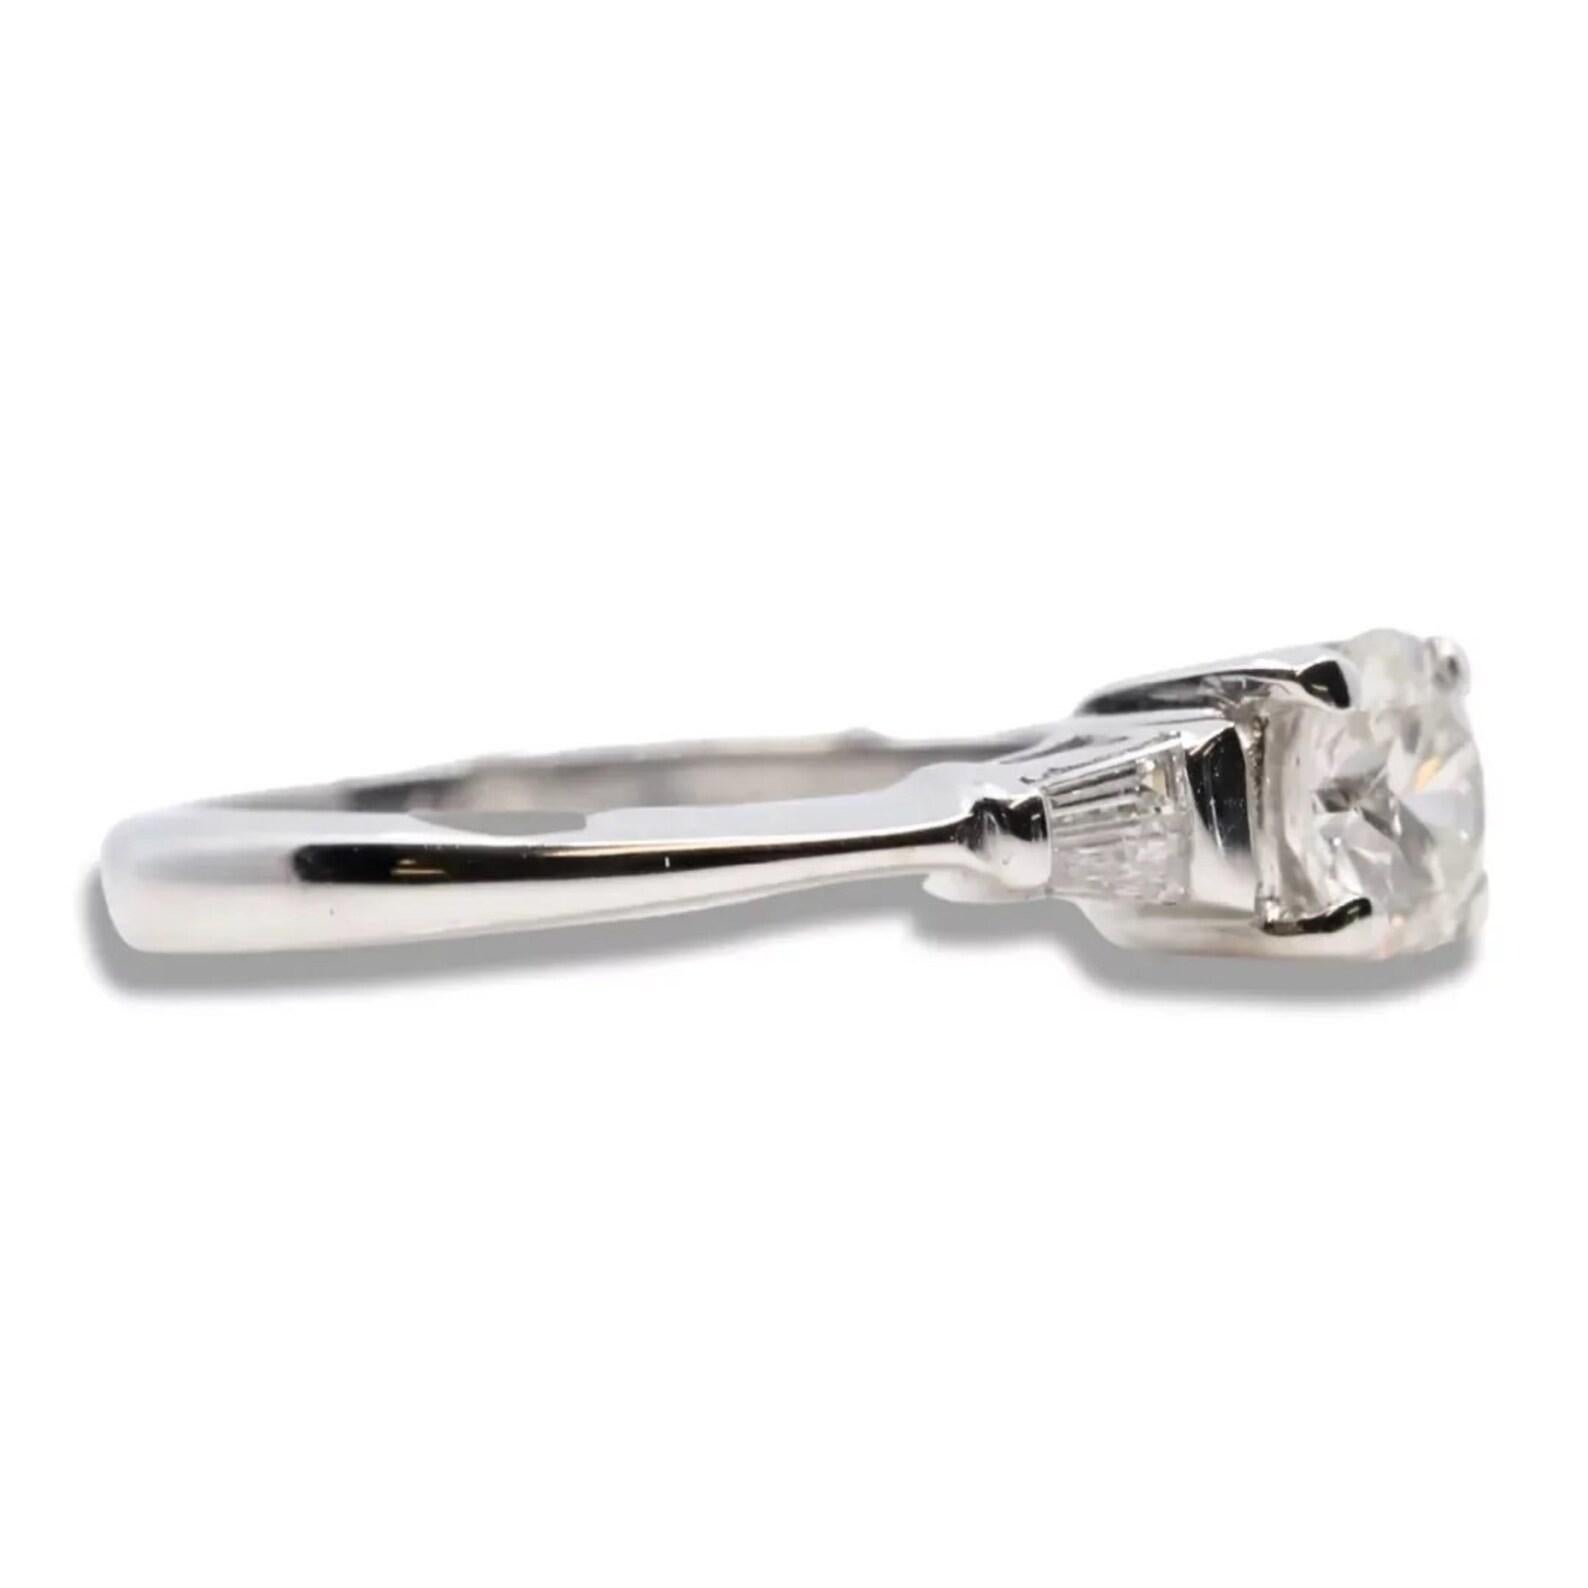 A contemporary ladies diamond engagement ring in 18 karat white gold. Centering this ring is a 0.52 carat G color SI2 clarity round brilliant cut diamond. Framing the center diamond are four accenting baguette cut diamonds. The four baguette cut